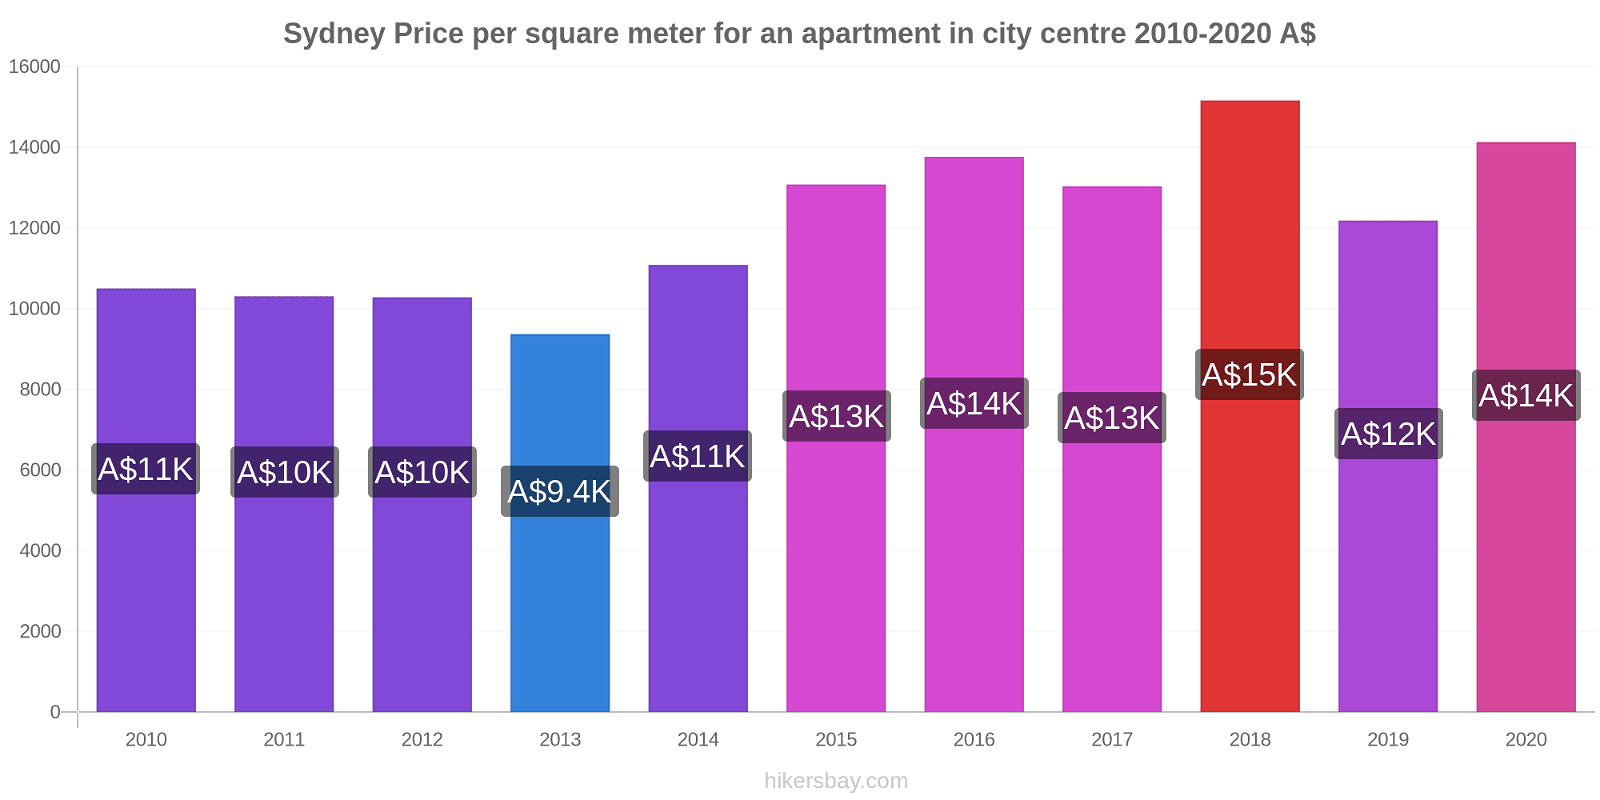 Sydney price changes Price per square meter for an apartment in city centre hikersbay.com